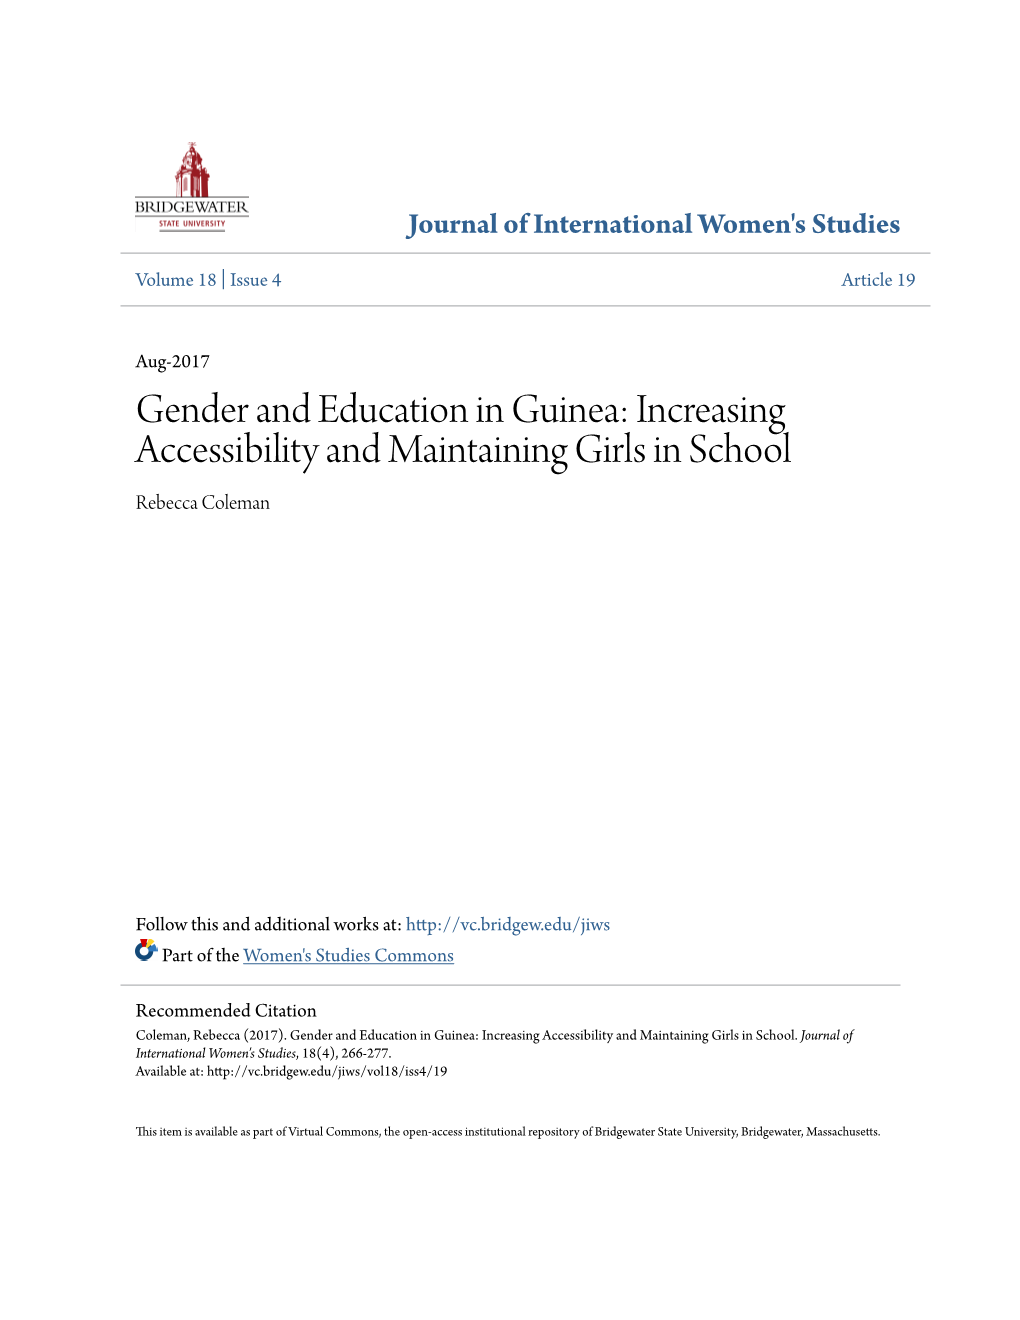 Gender and Education in Guinea: Increasing Accessibility and Maintaining Girls in School Rebecca Coleman